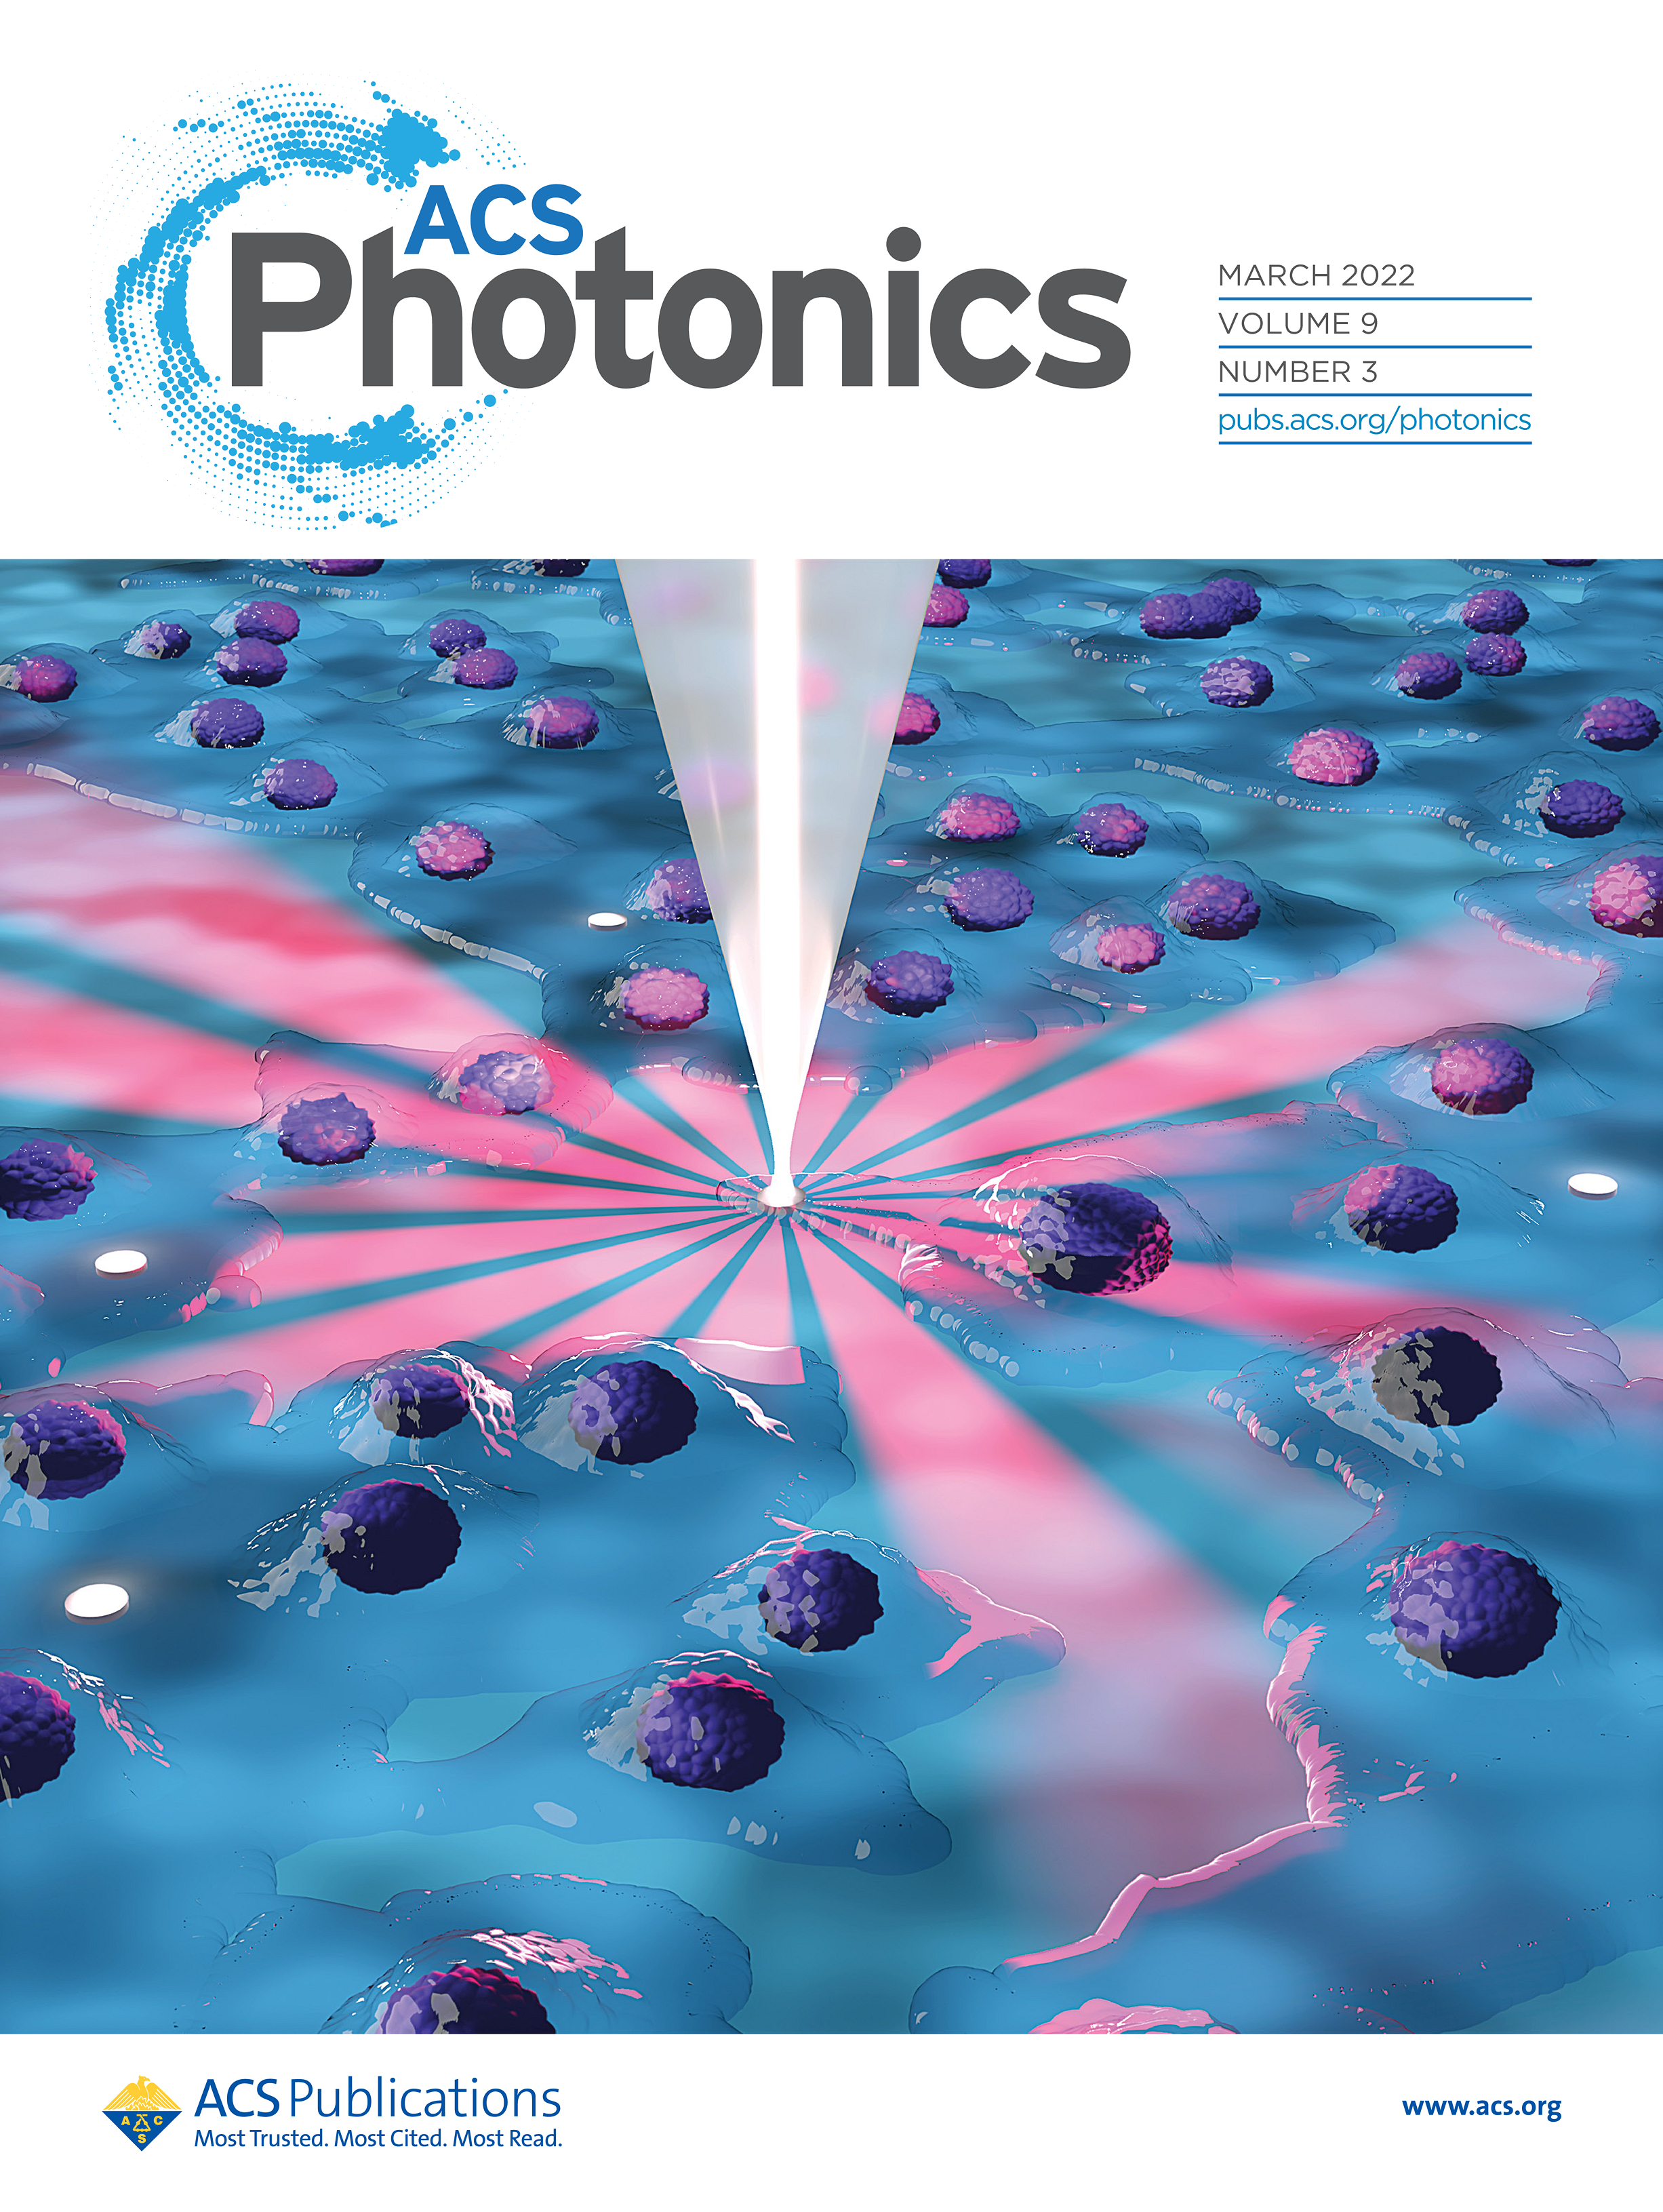 Image of the ACS Photonics journal cover showing a rendered image of a glowing microdisk laser integrated into biological cells